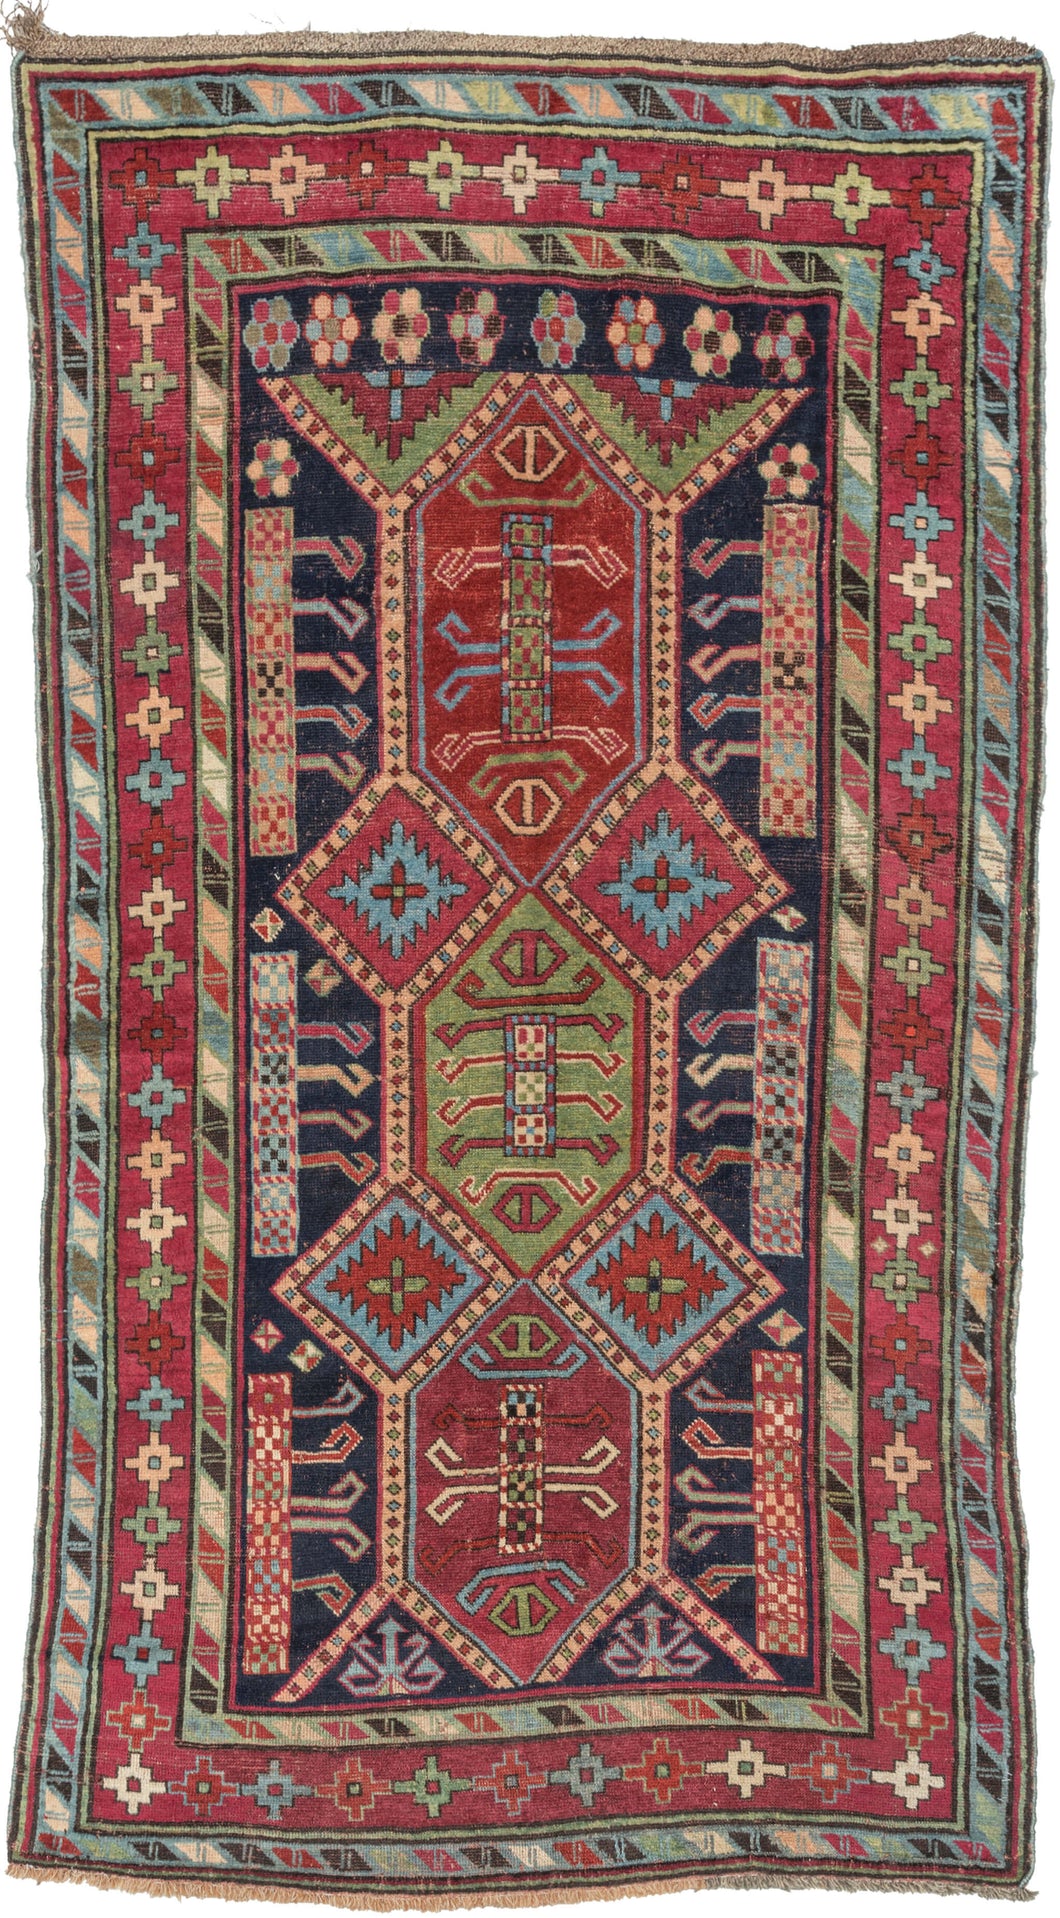 This rug was woven in the Karabagh region of the South Caucasus during the late 19th century.   Itt features a powerful all design of angular shapes on a deep navy ground. Framed by a main border of geometric plus shaped rosettes sandwiched between two 